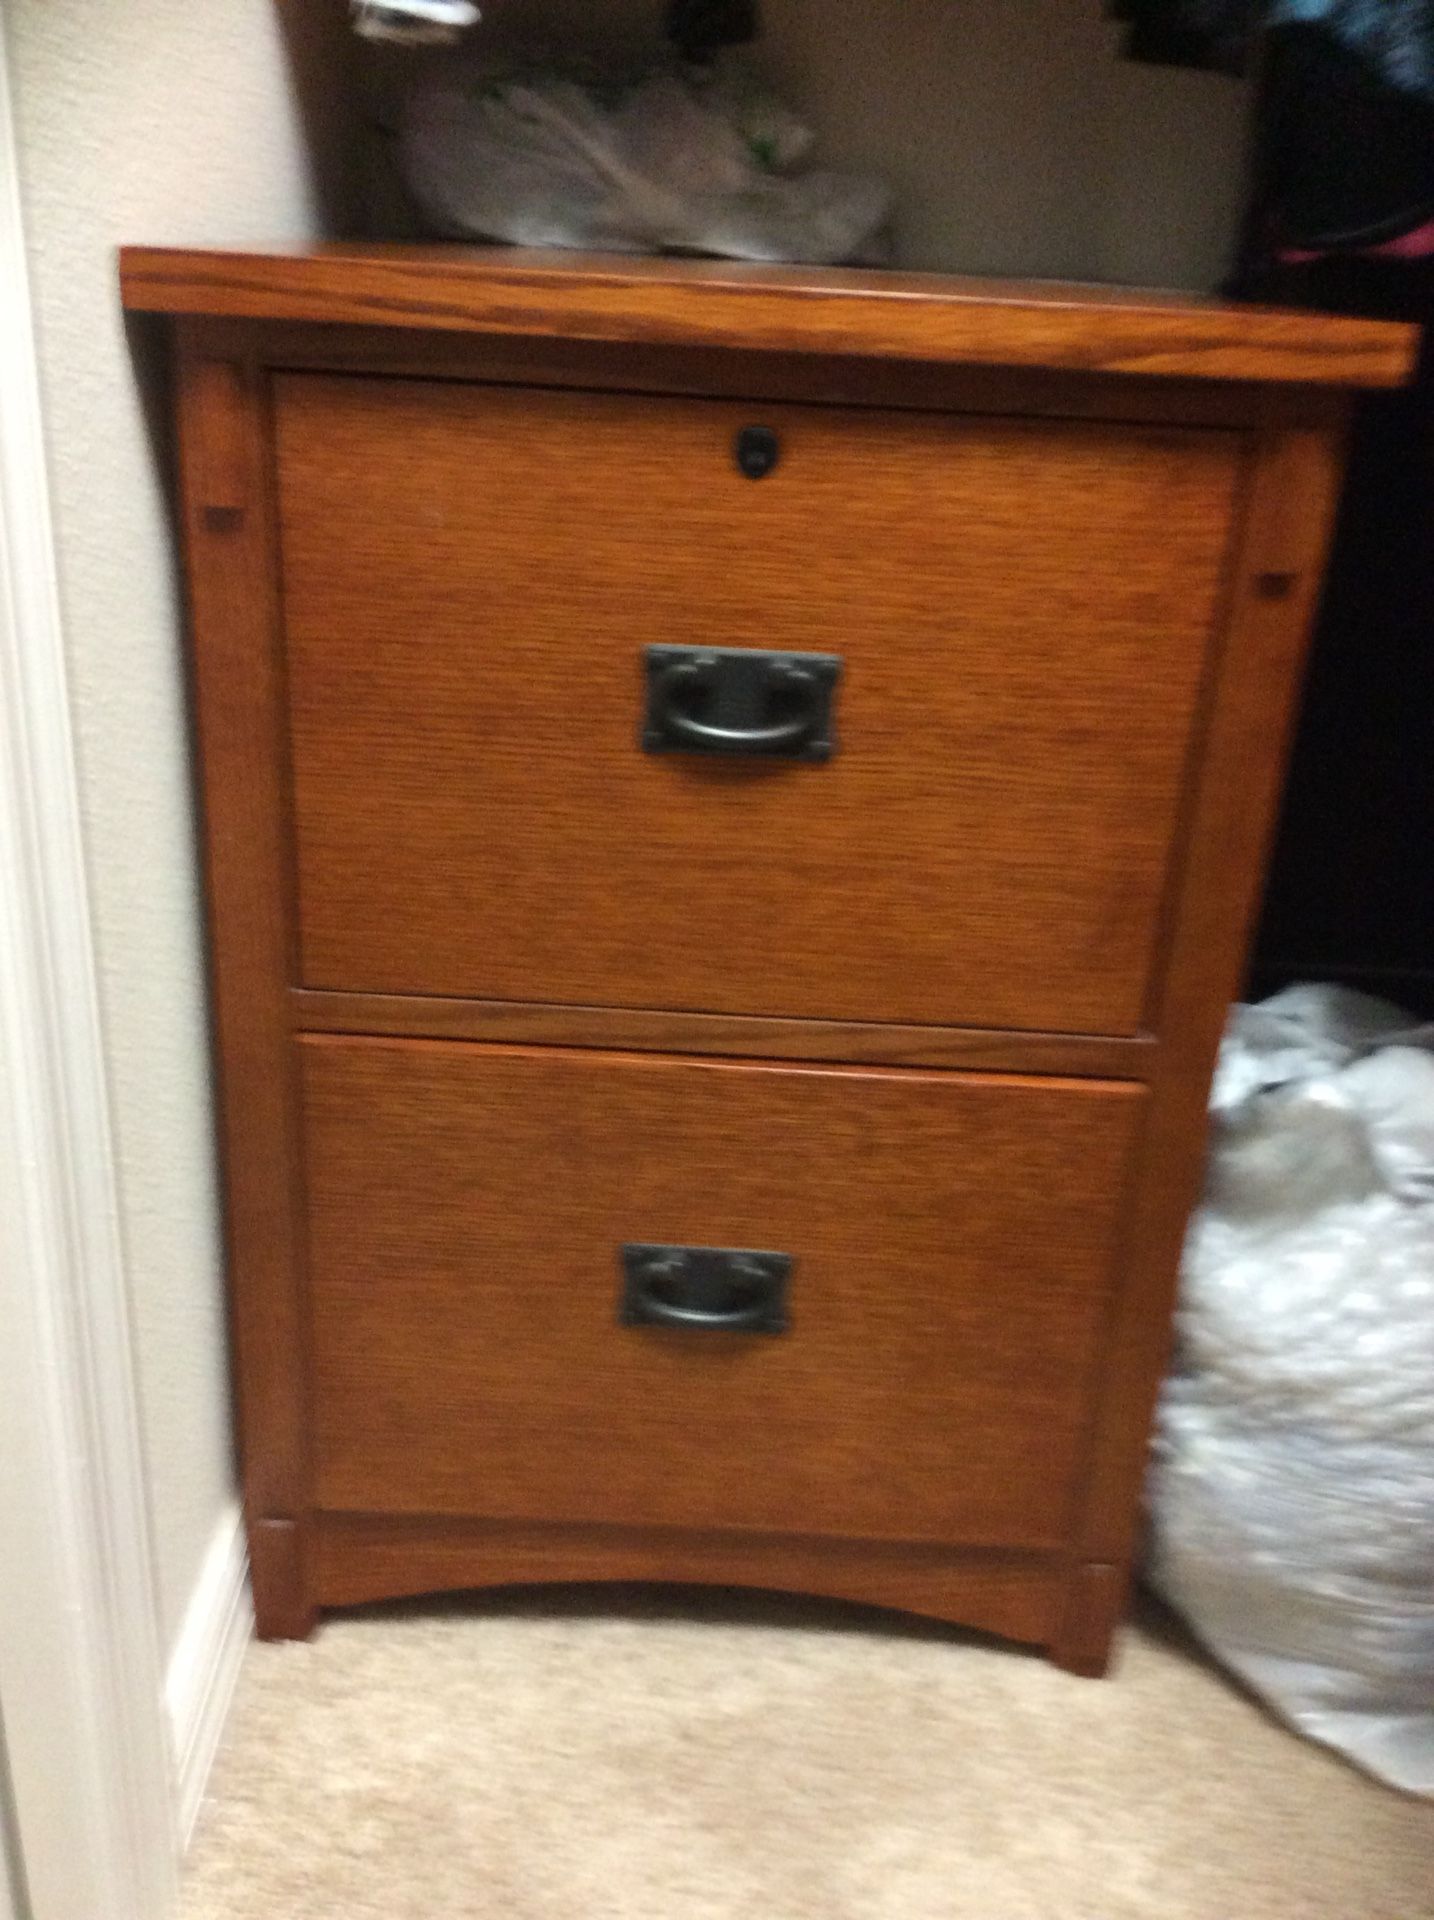 Wood file cabinet. Excellent condition.